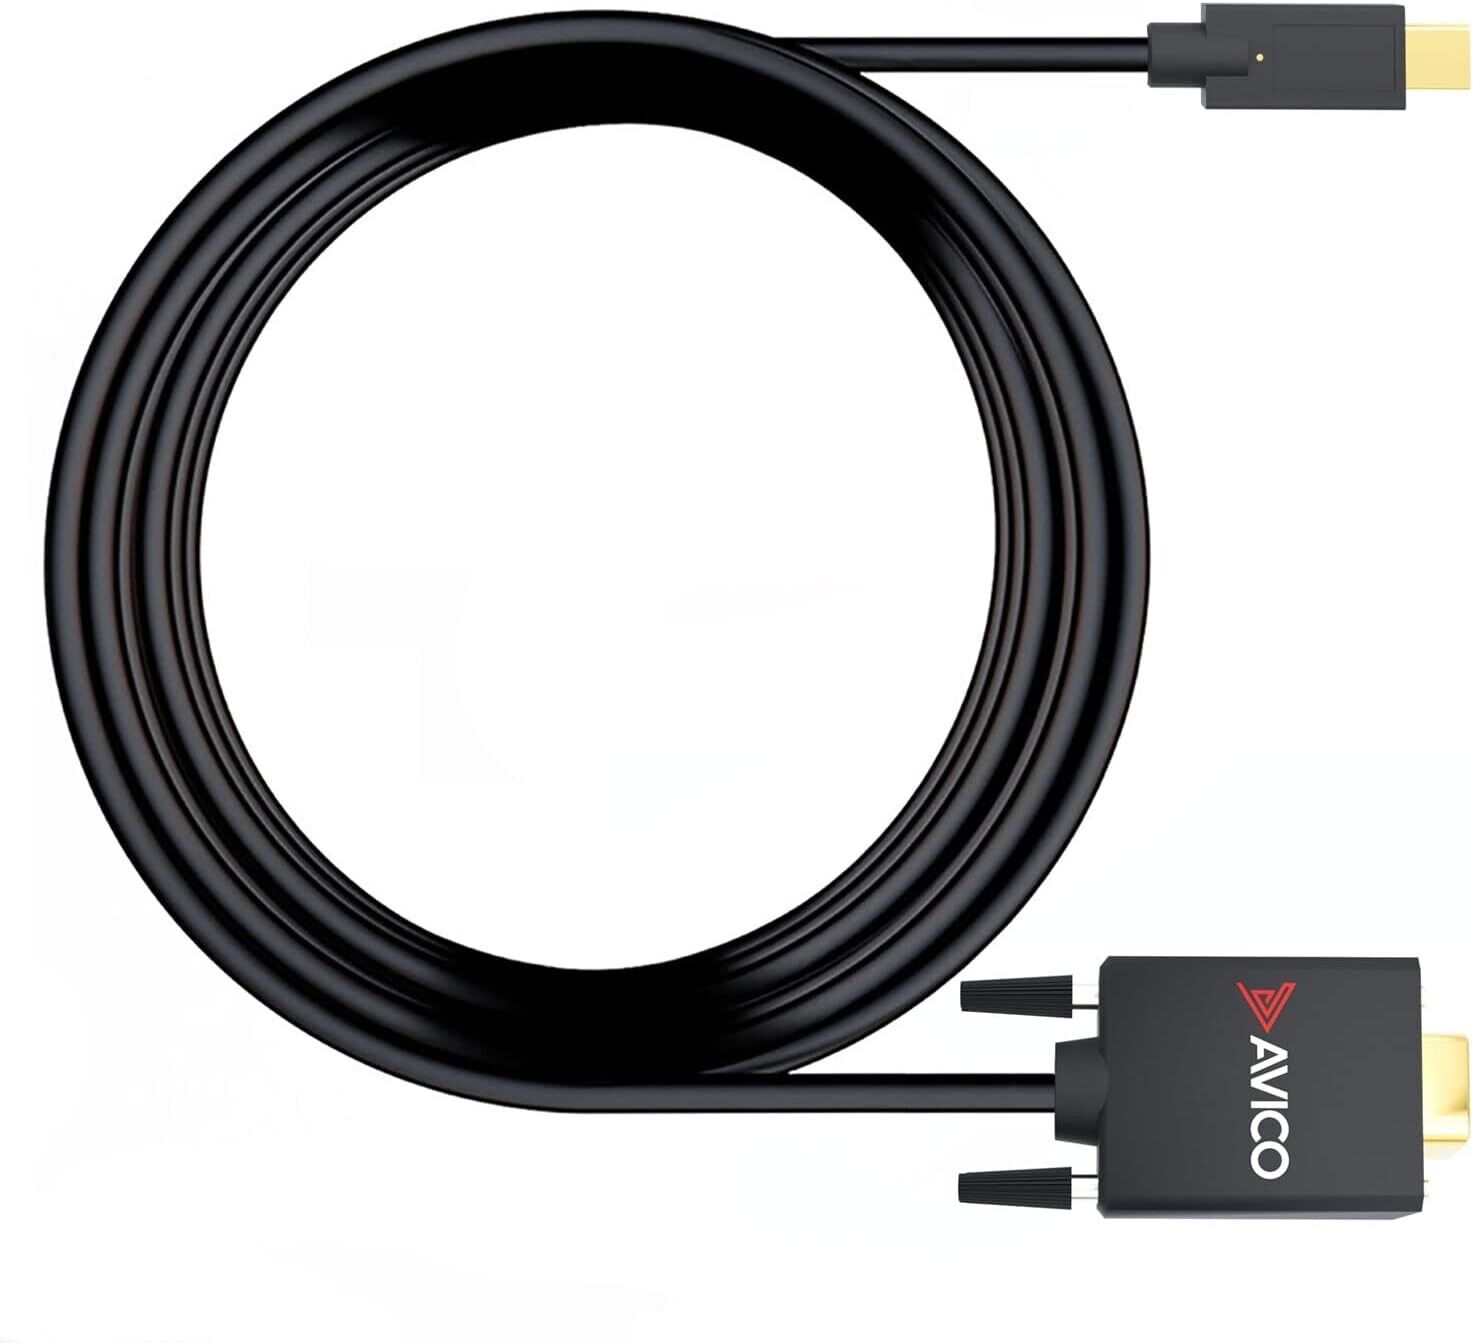 Avico USB C to VGA Adapter – 1080P @ 60hz – 6ft Cable – Thunderbolt Compatible